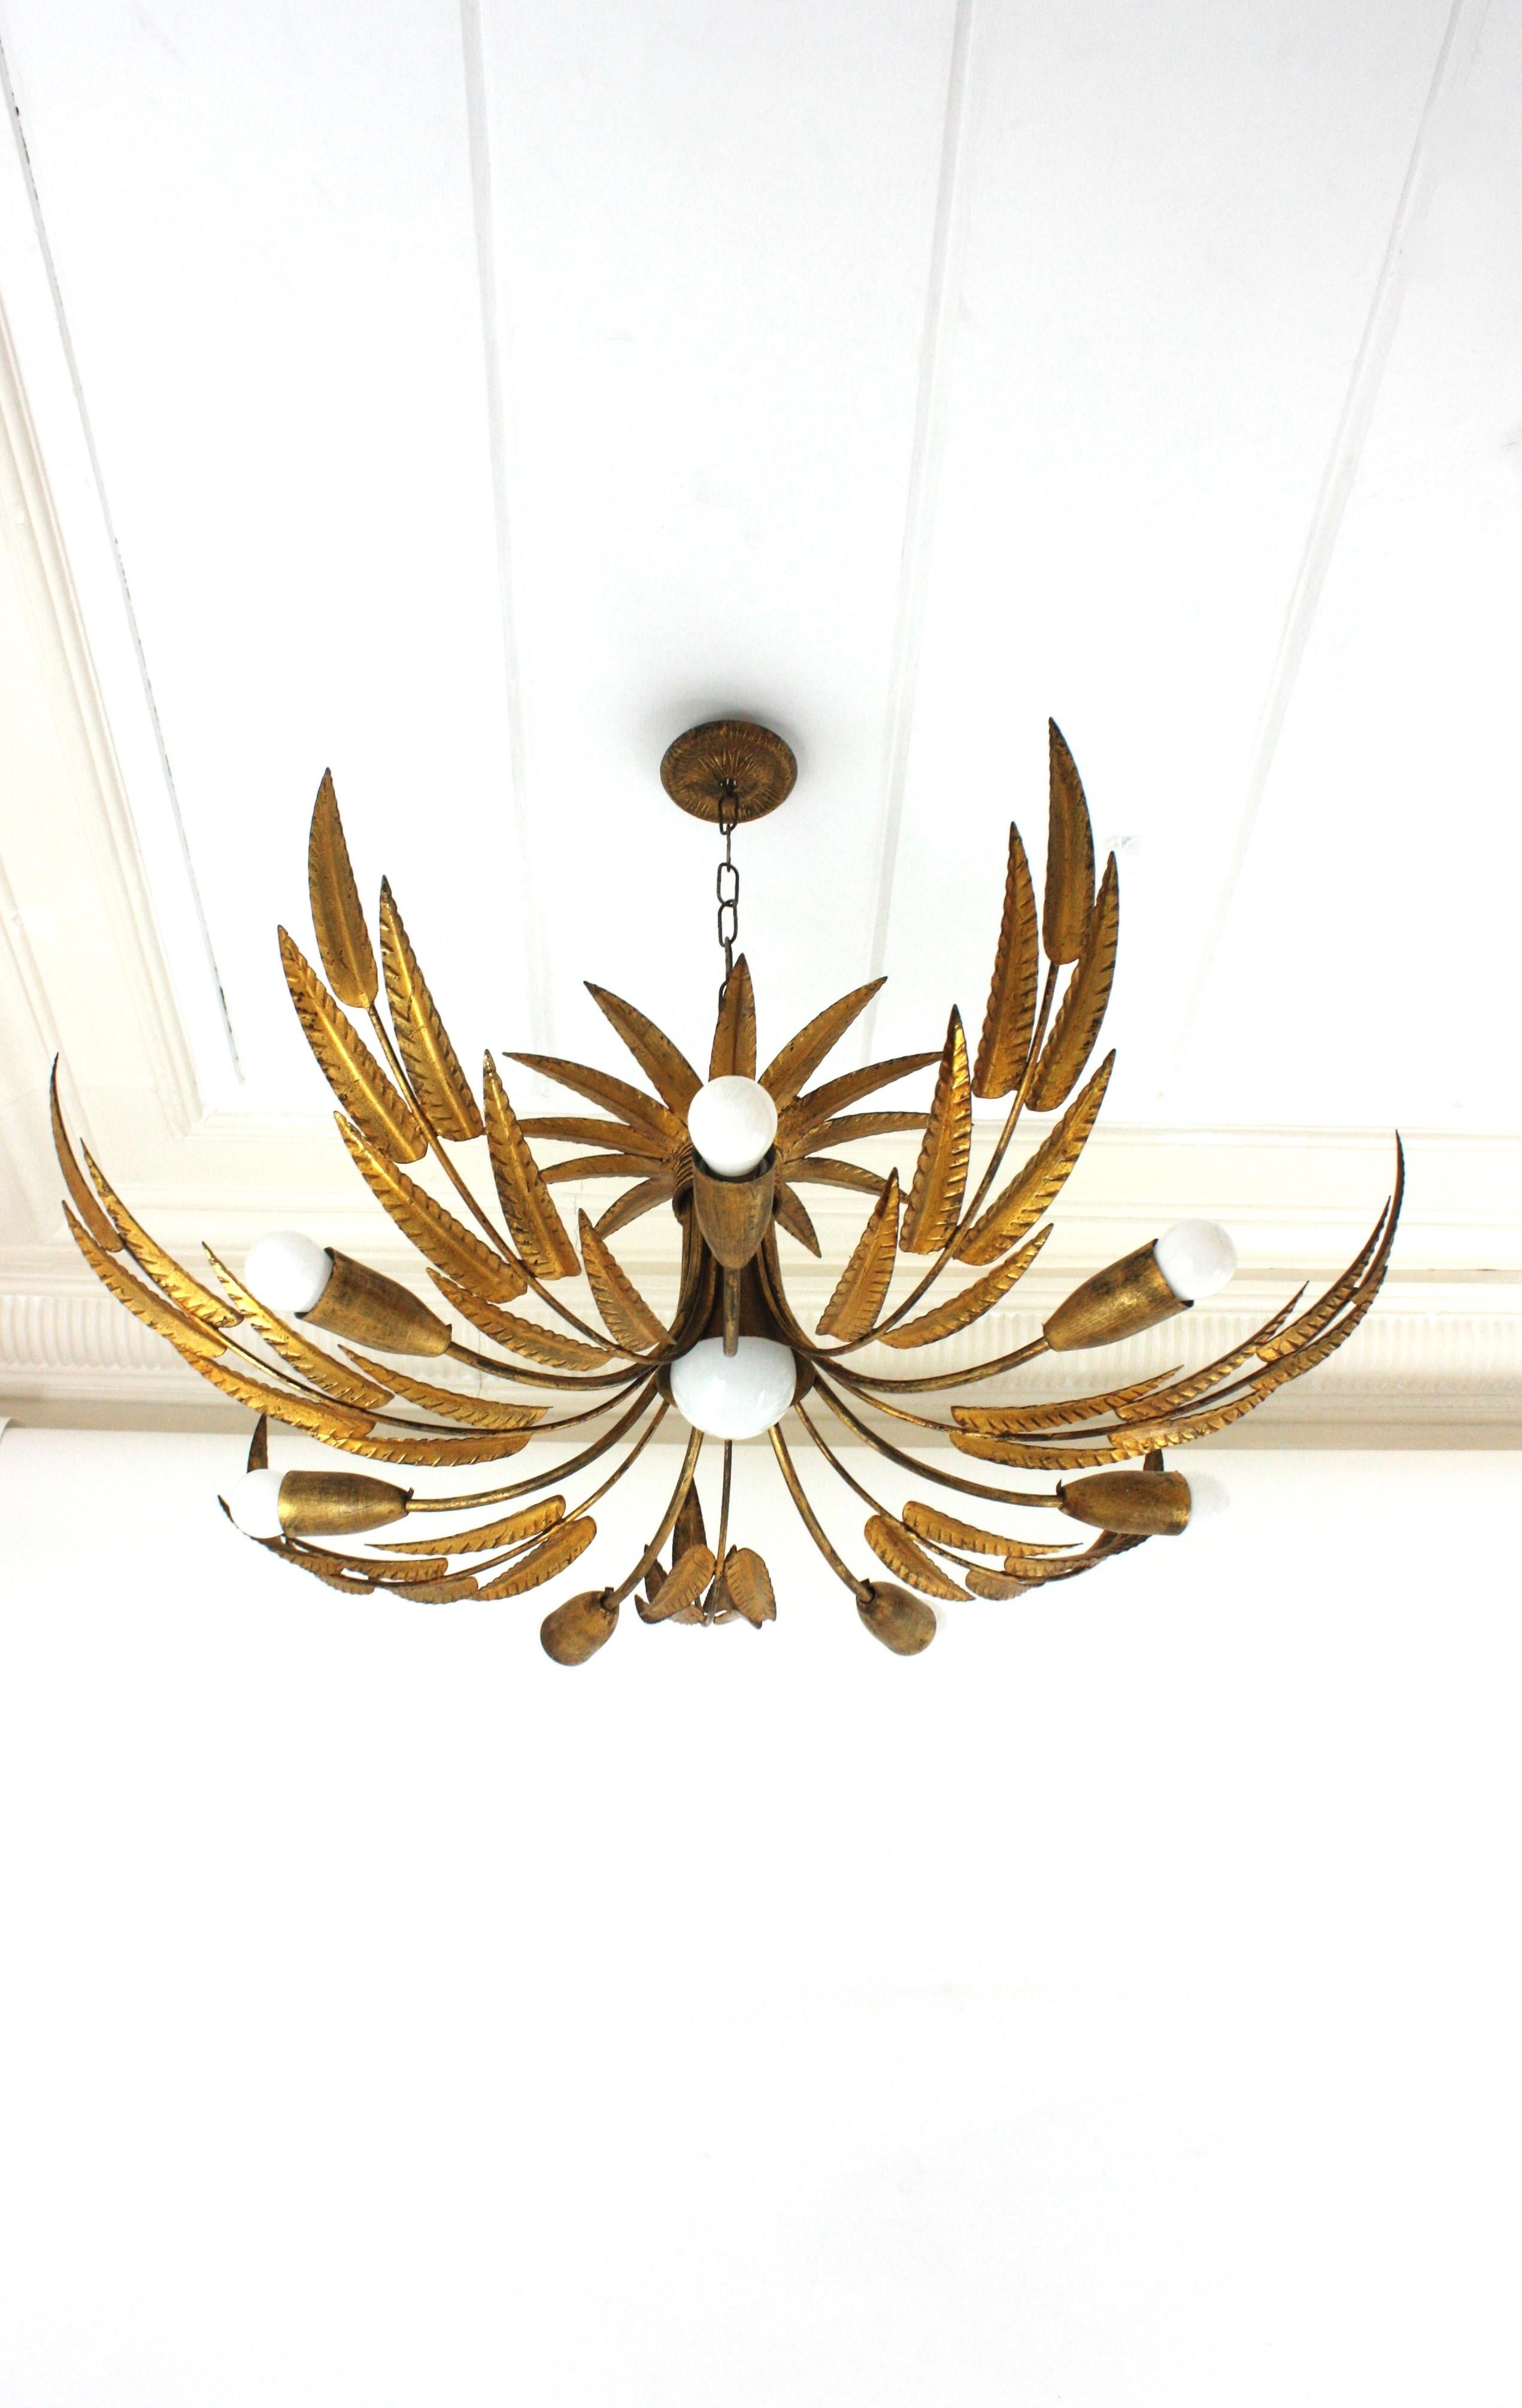 Outstanding spanish foliage sunburst flush mount ceiling light in gilt iron, Ferro Art, 1950s
Extra large size (34,64  inches diameter). 8 Lights.
To be used as ceiling light fixture or as chandelier / pendant light adding a chain to the desired